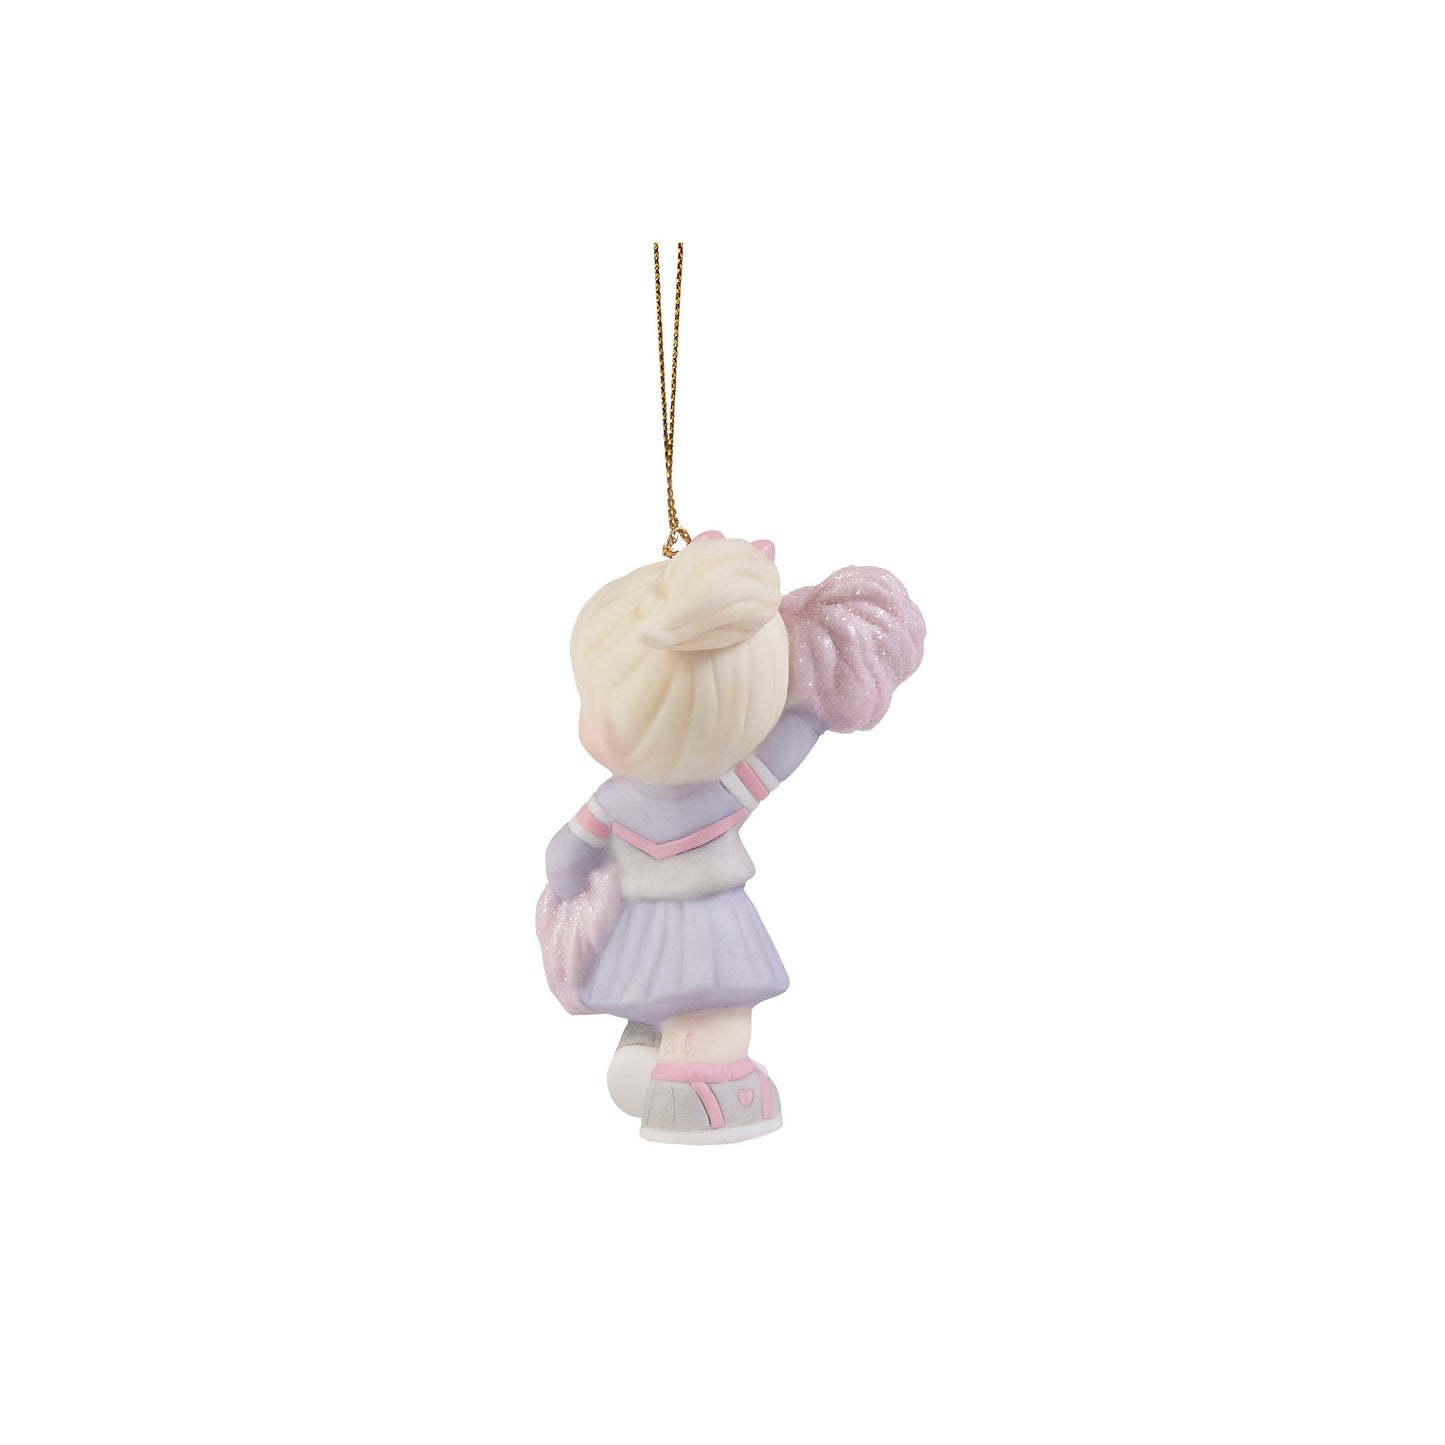 Reach For The Sky Ornament Blonde Girl Ornament by Precious Moments